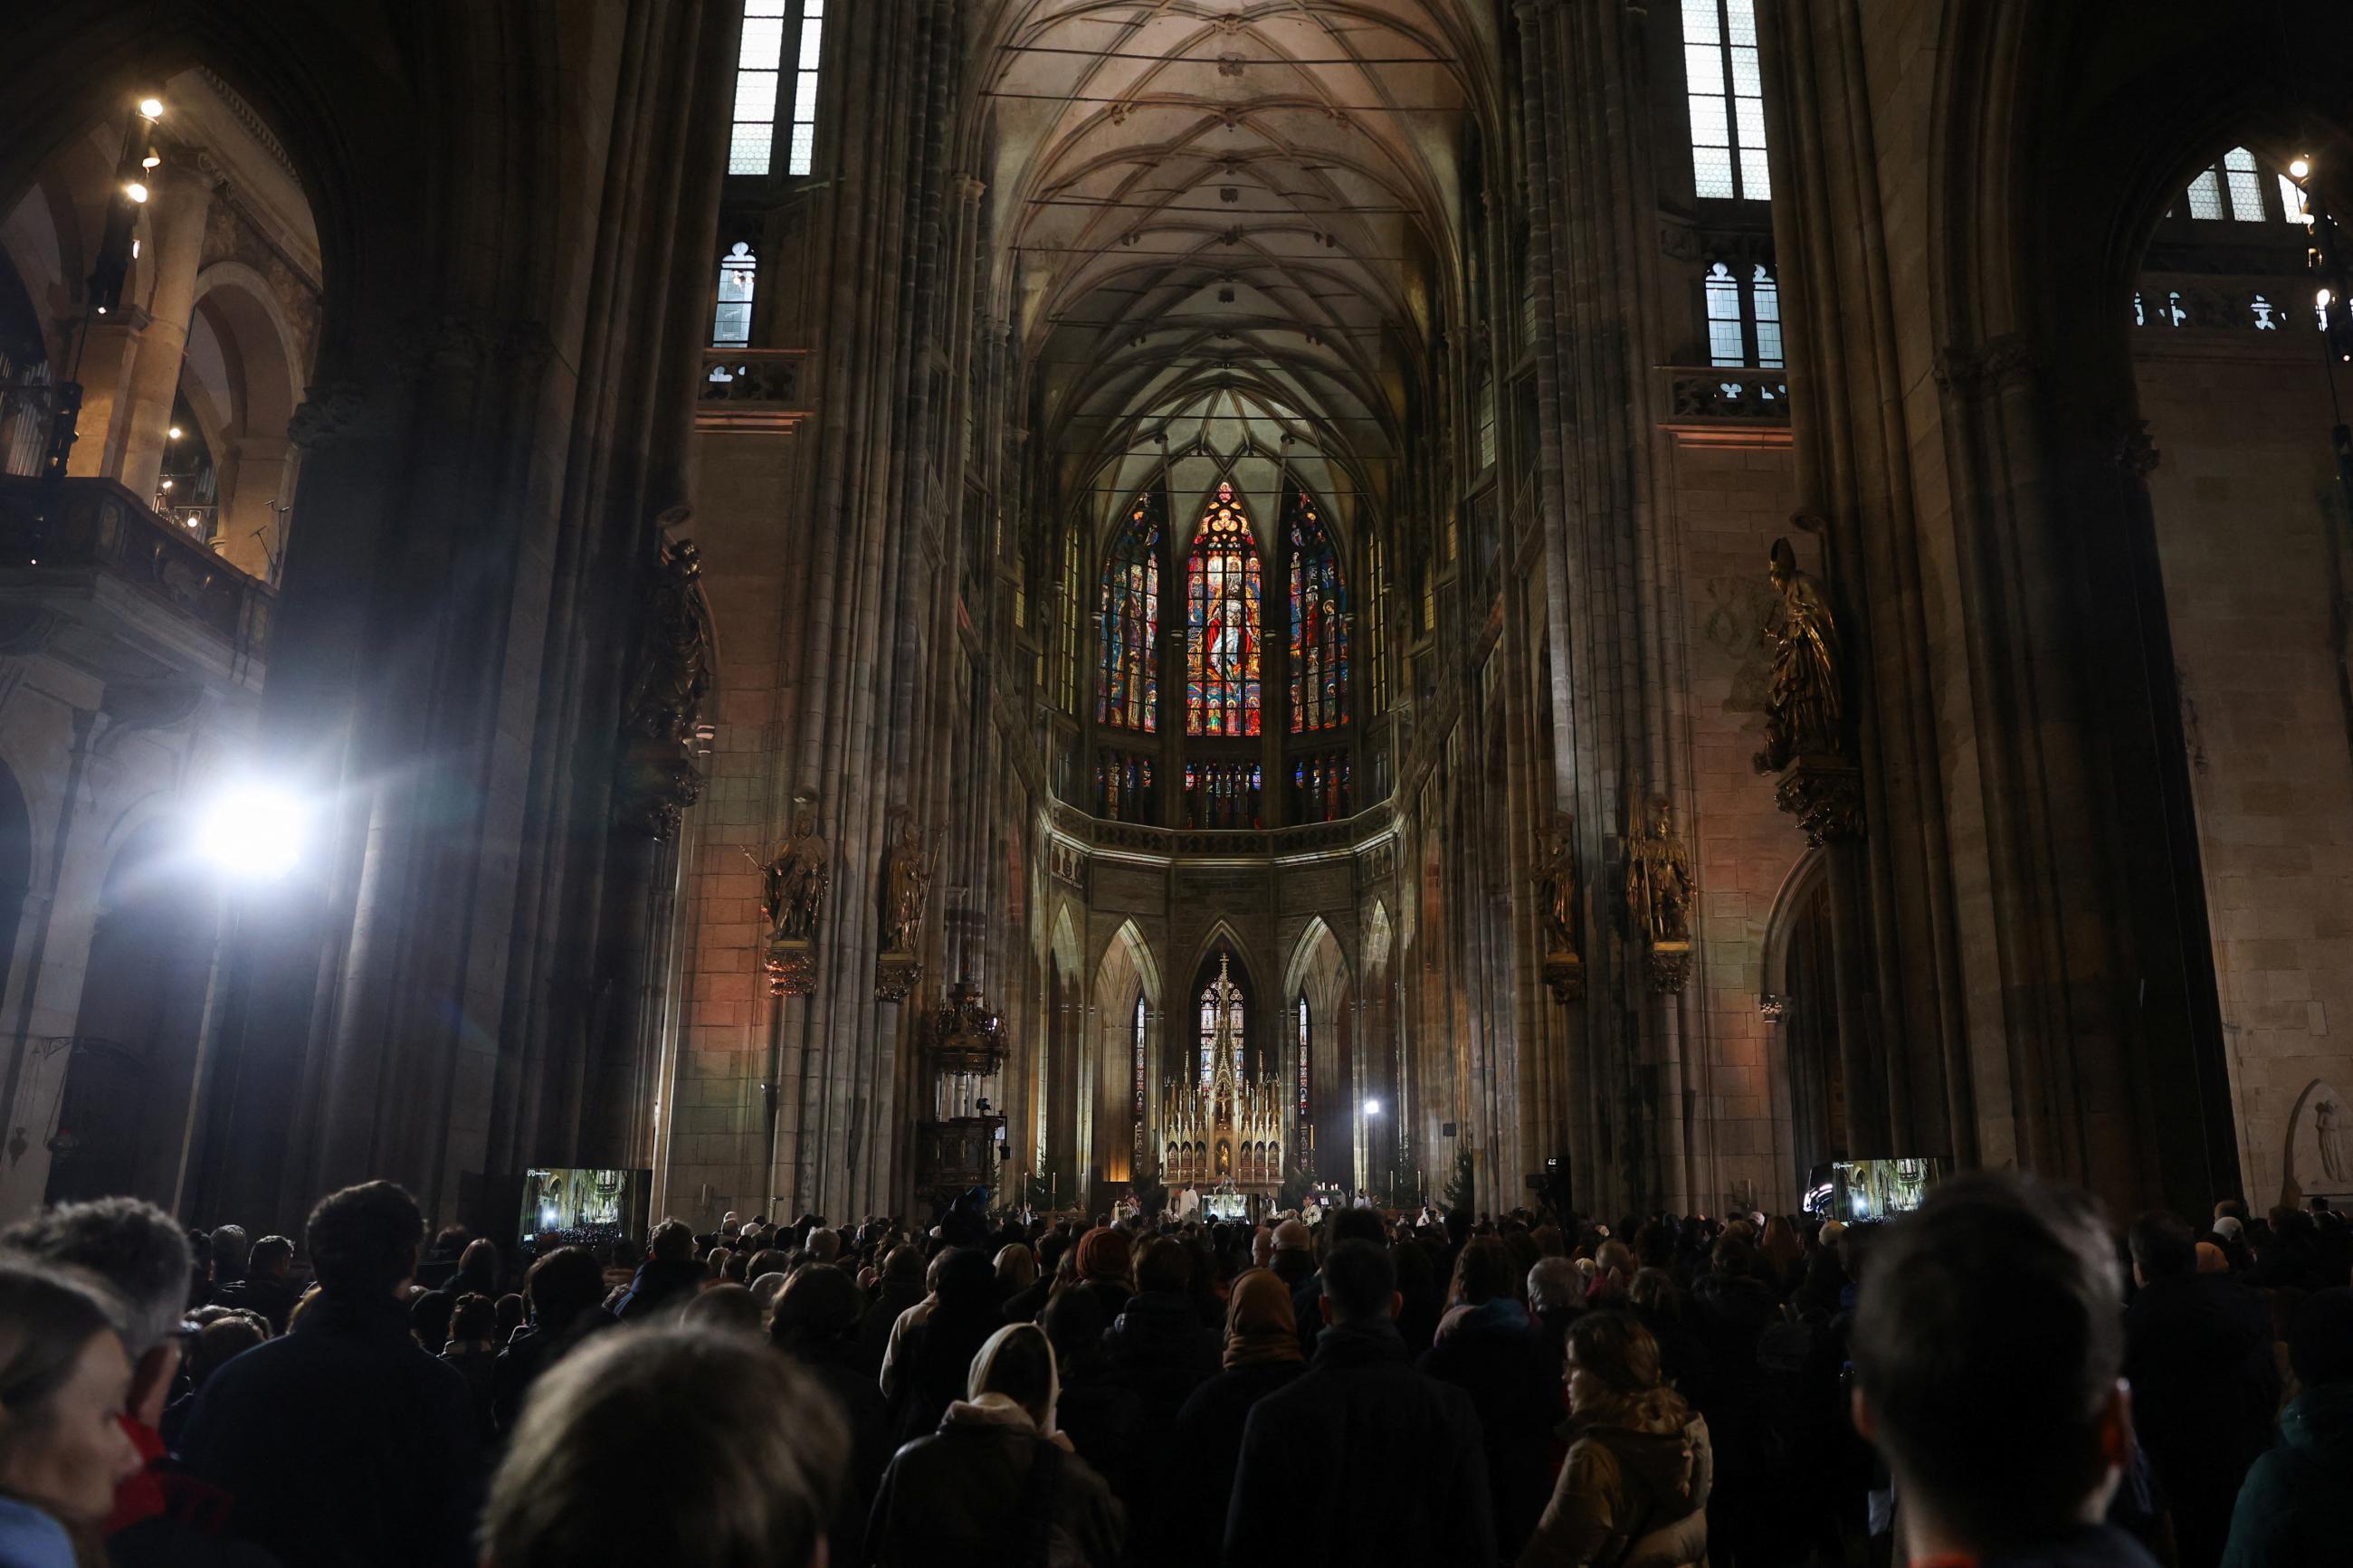 People attend a mass commemorating the victims of a shooting at one of Charles University's buildings, as people observe a national mourning day.